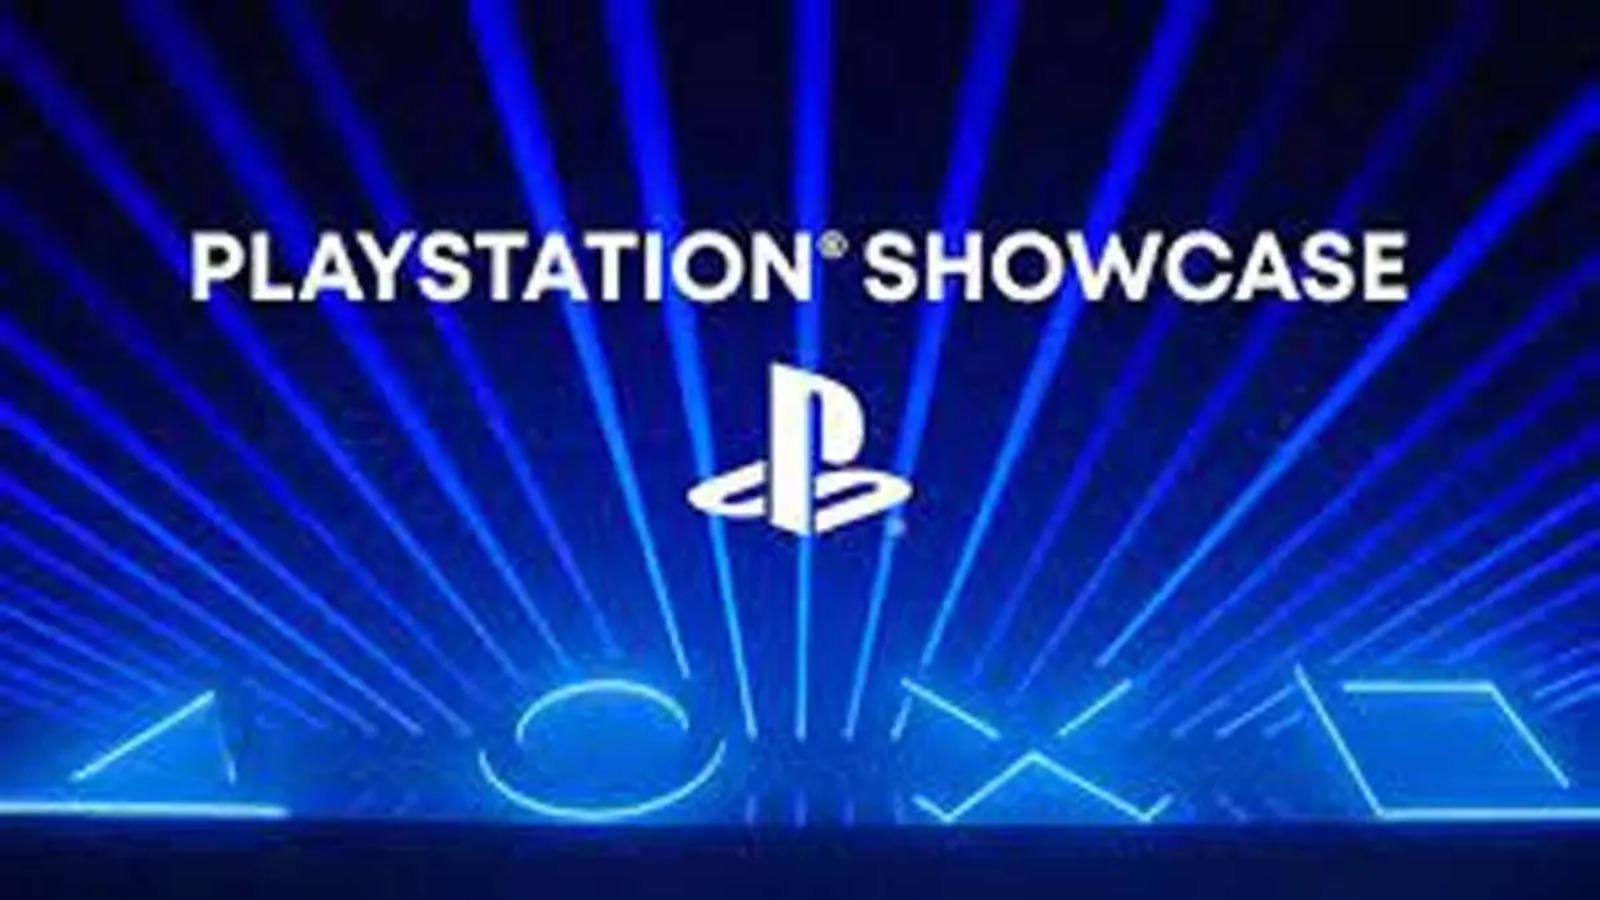 PlayStation Showcase 2021  Huge Games RUMORED/Games that Could Be